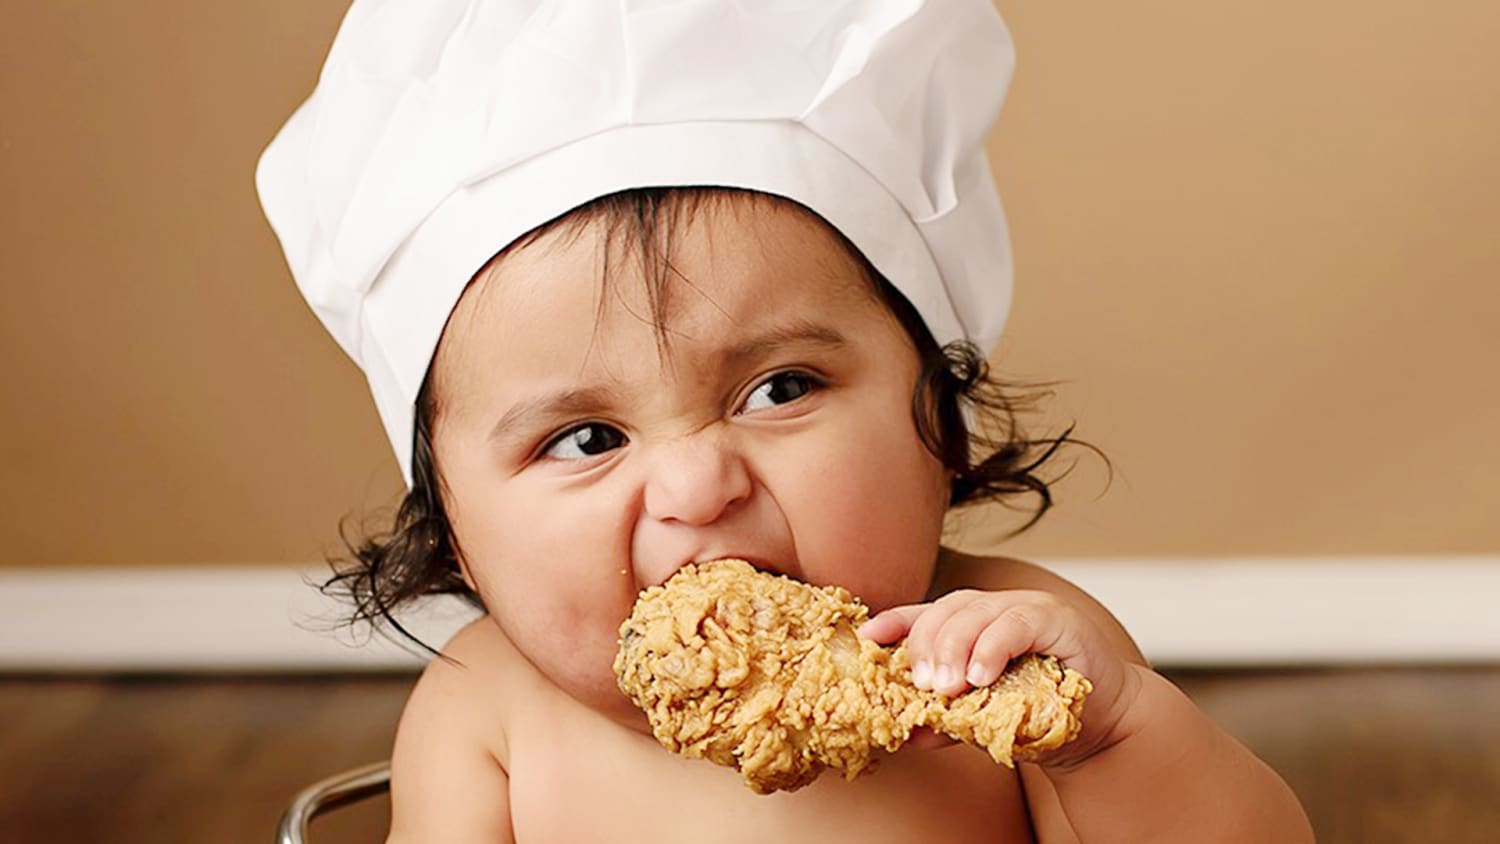 Baby tries fried chicken for 1st time in cute photo shoot